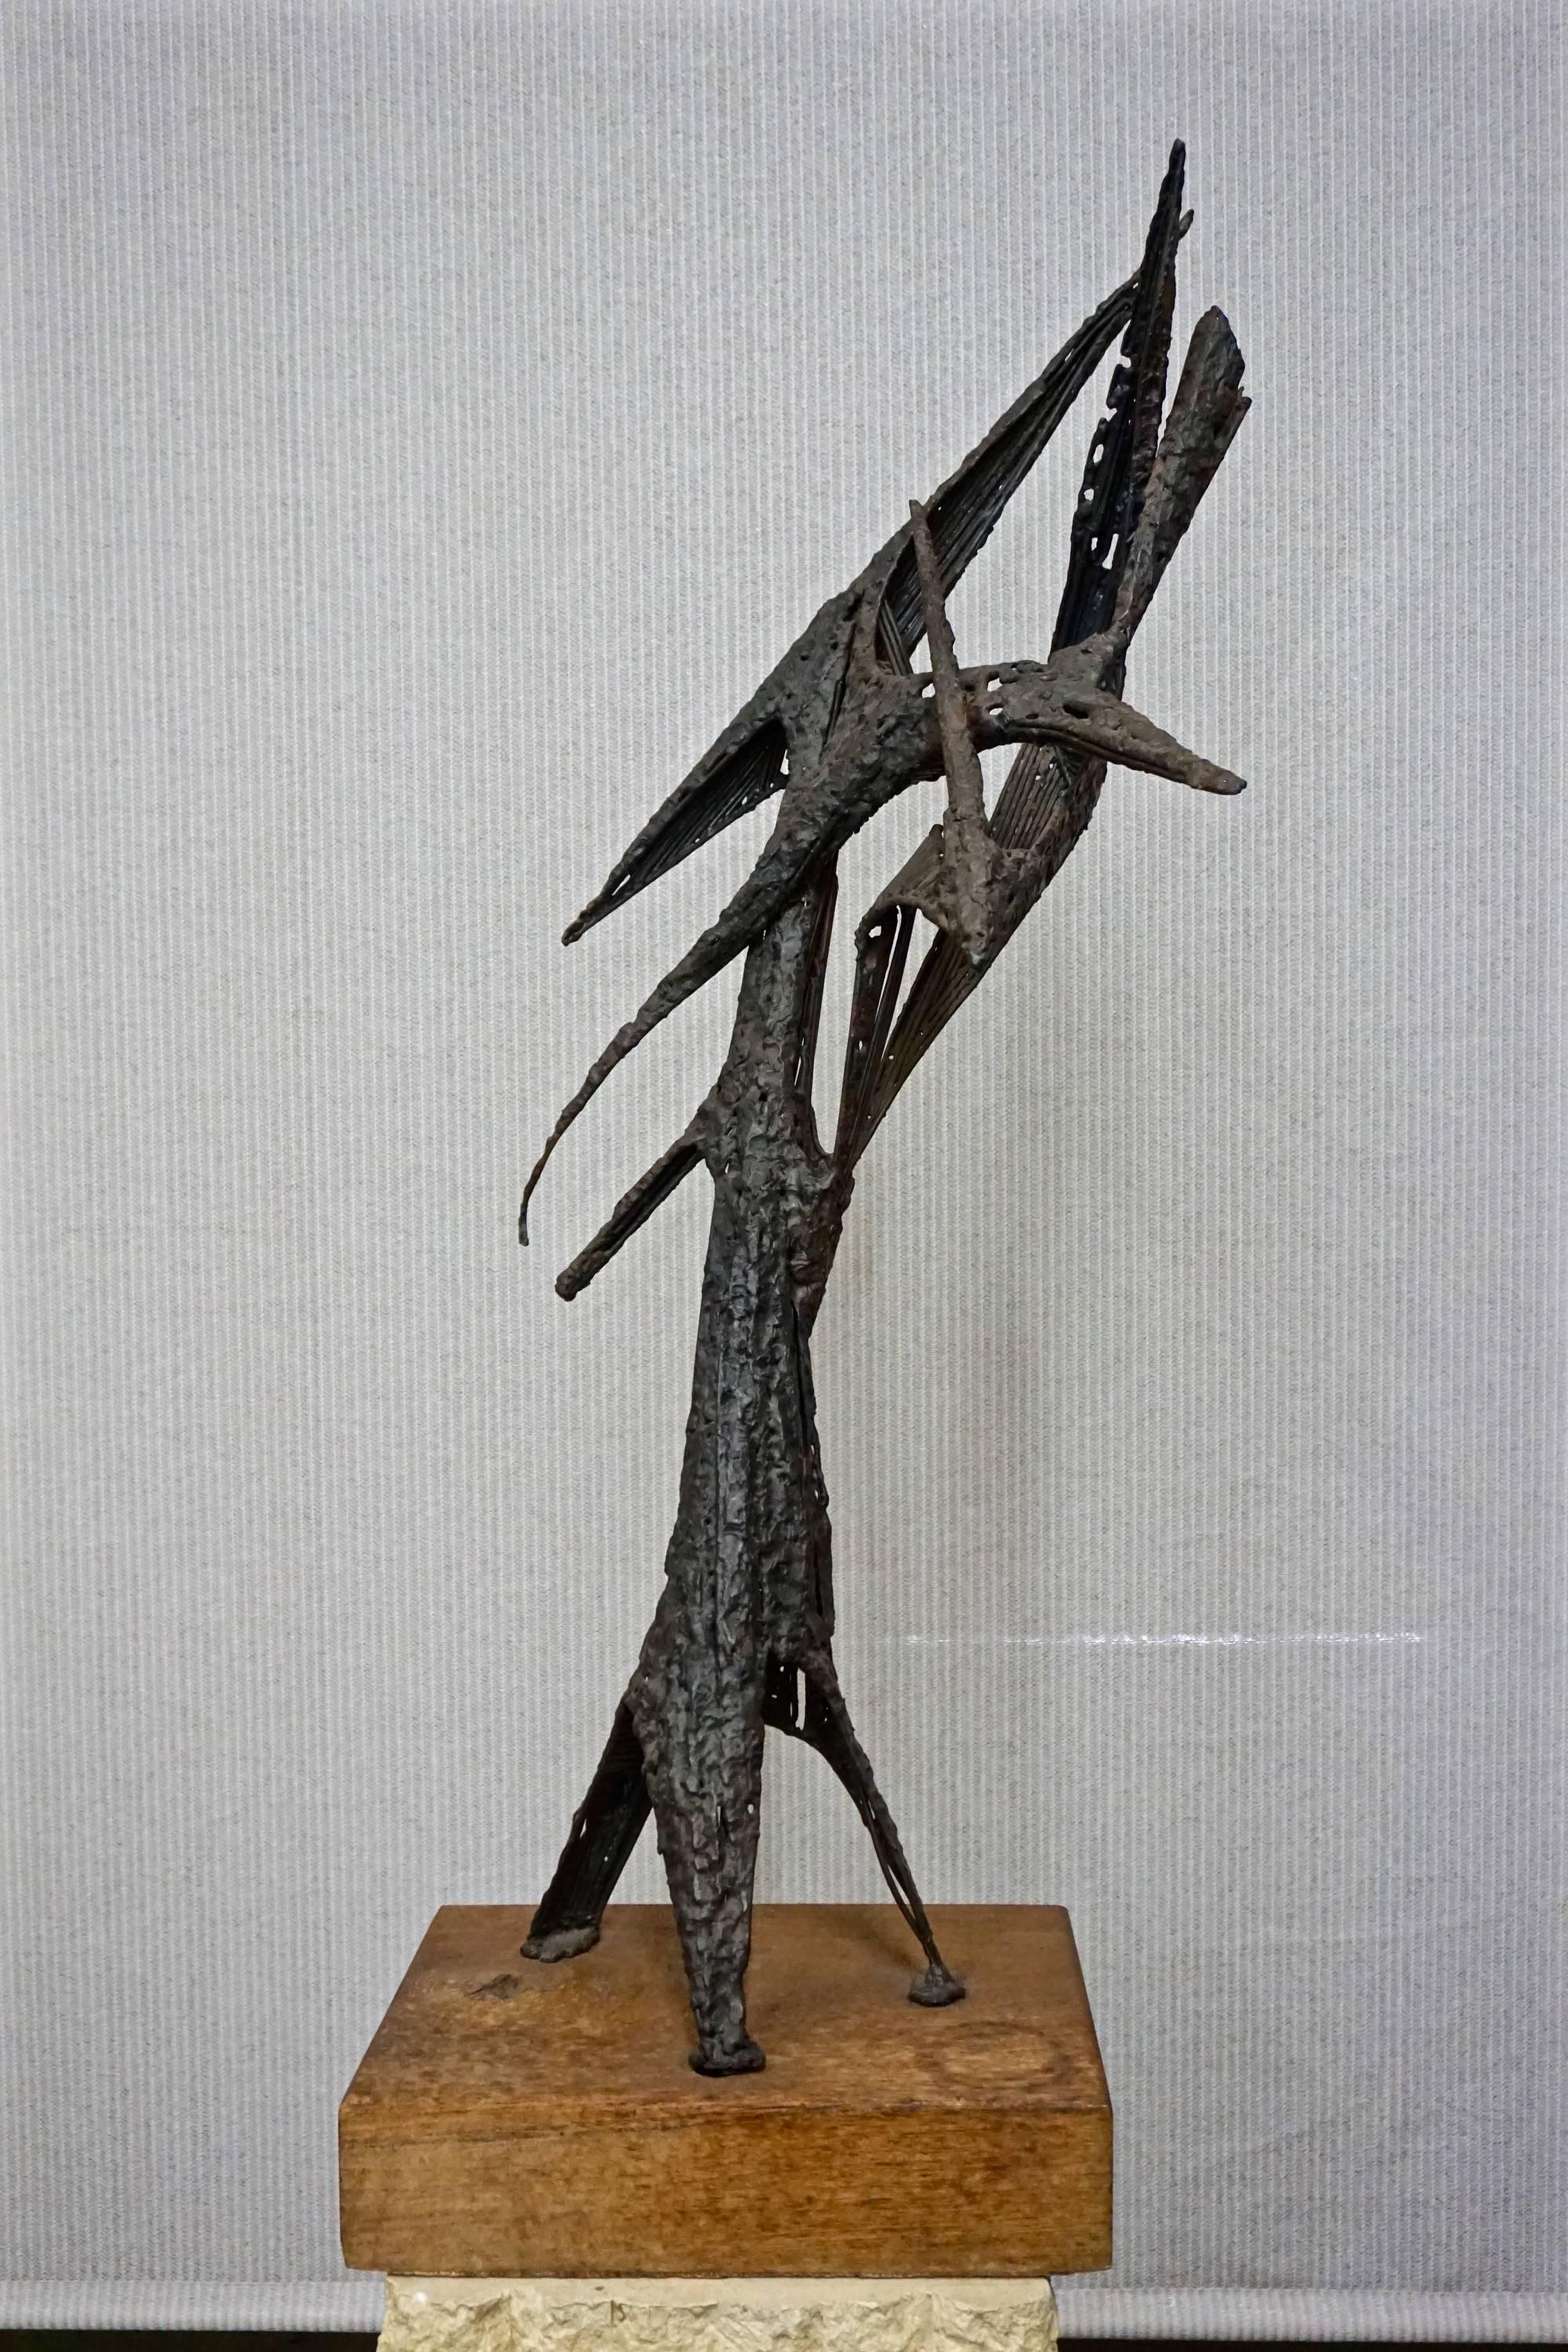 Torch cut and welded steel sculpture,unsigned.Mounted on wood stand.